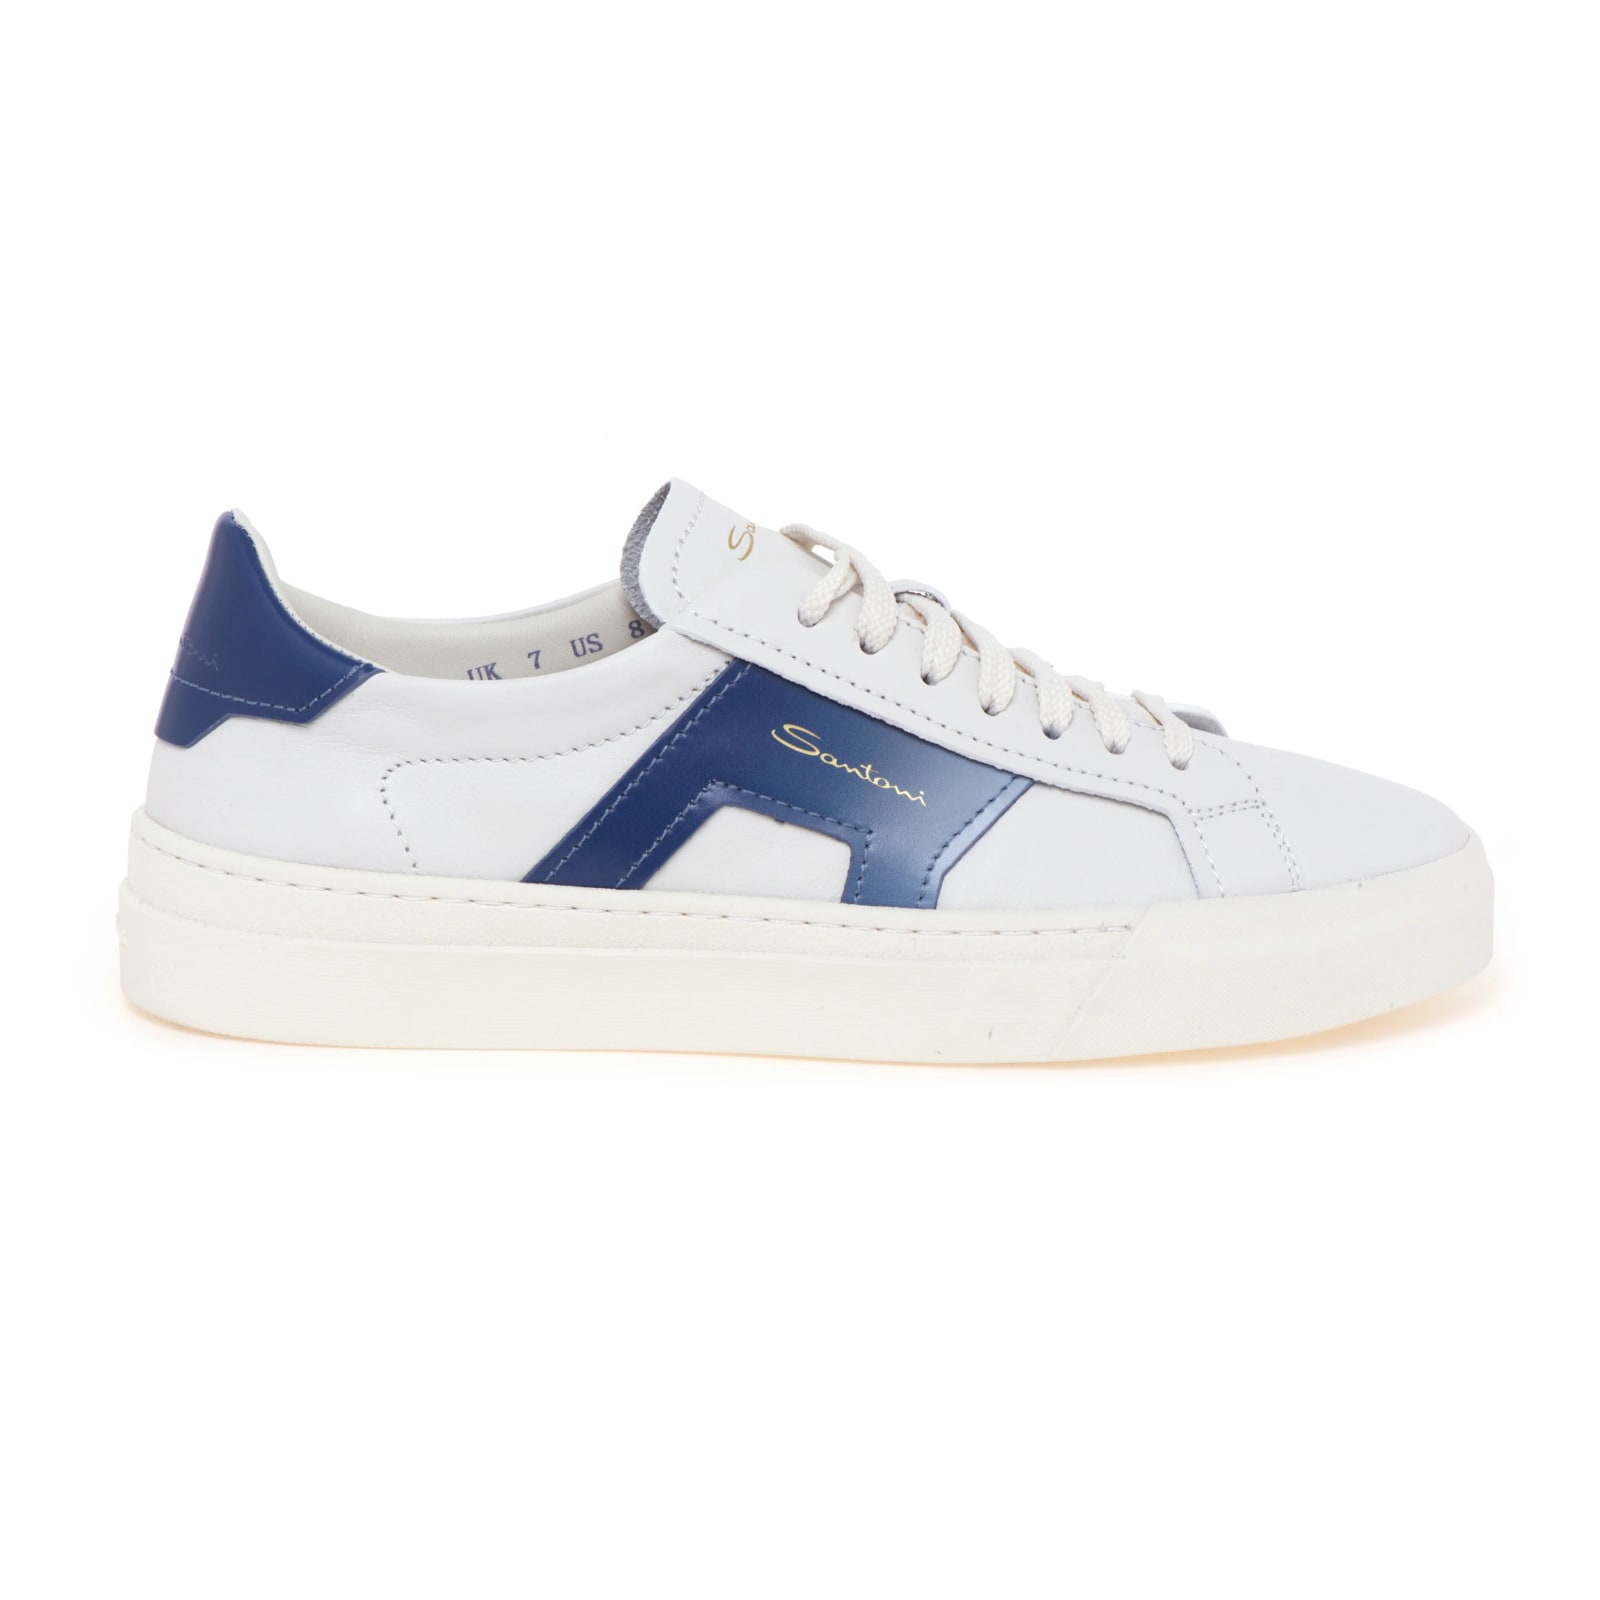 Shop Santoni Dbs Sneakers In White And Blue Leather In Panna/blu